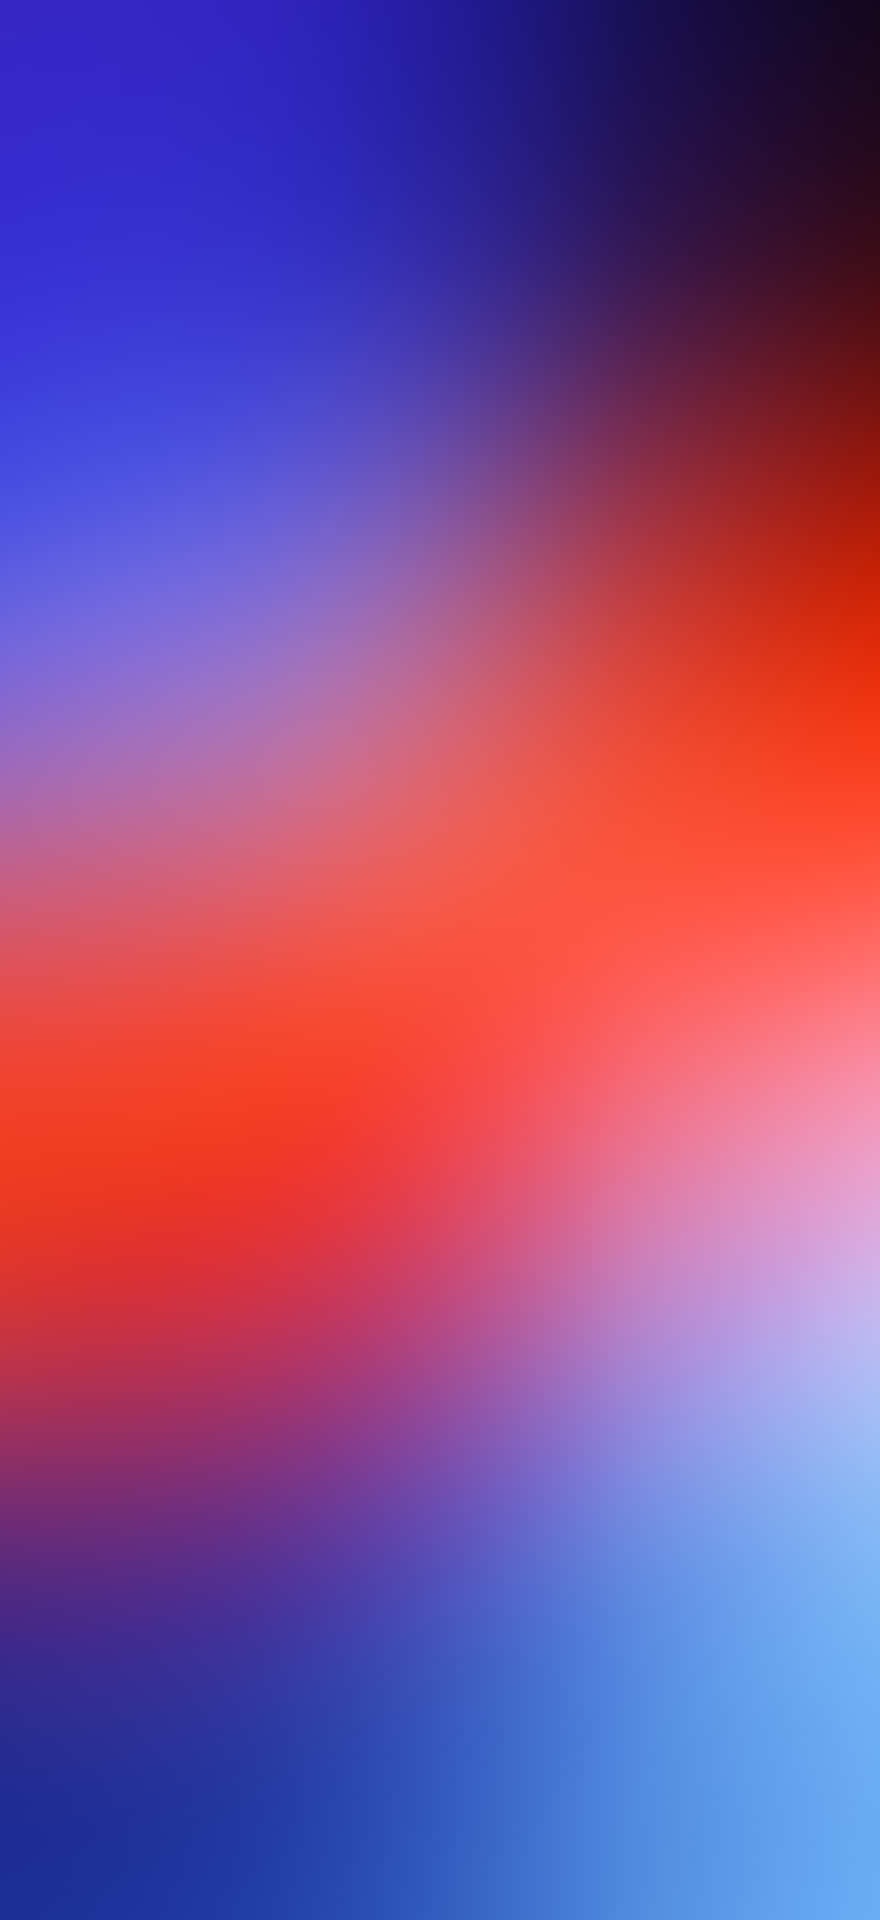 Red And Blue Blurred For Iphone Wallpaper